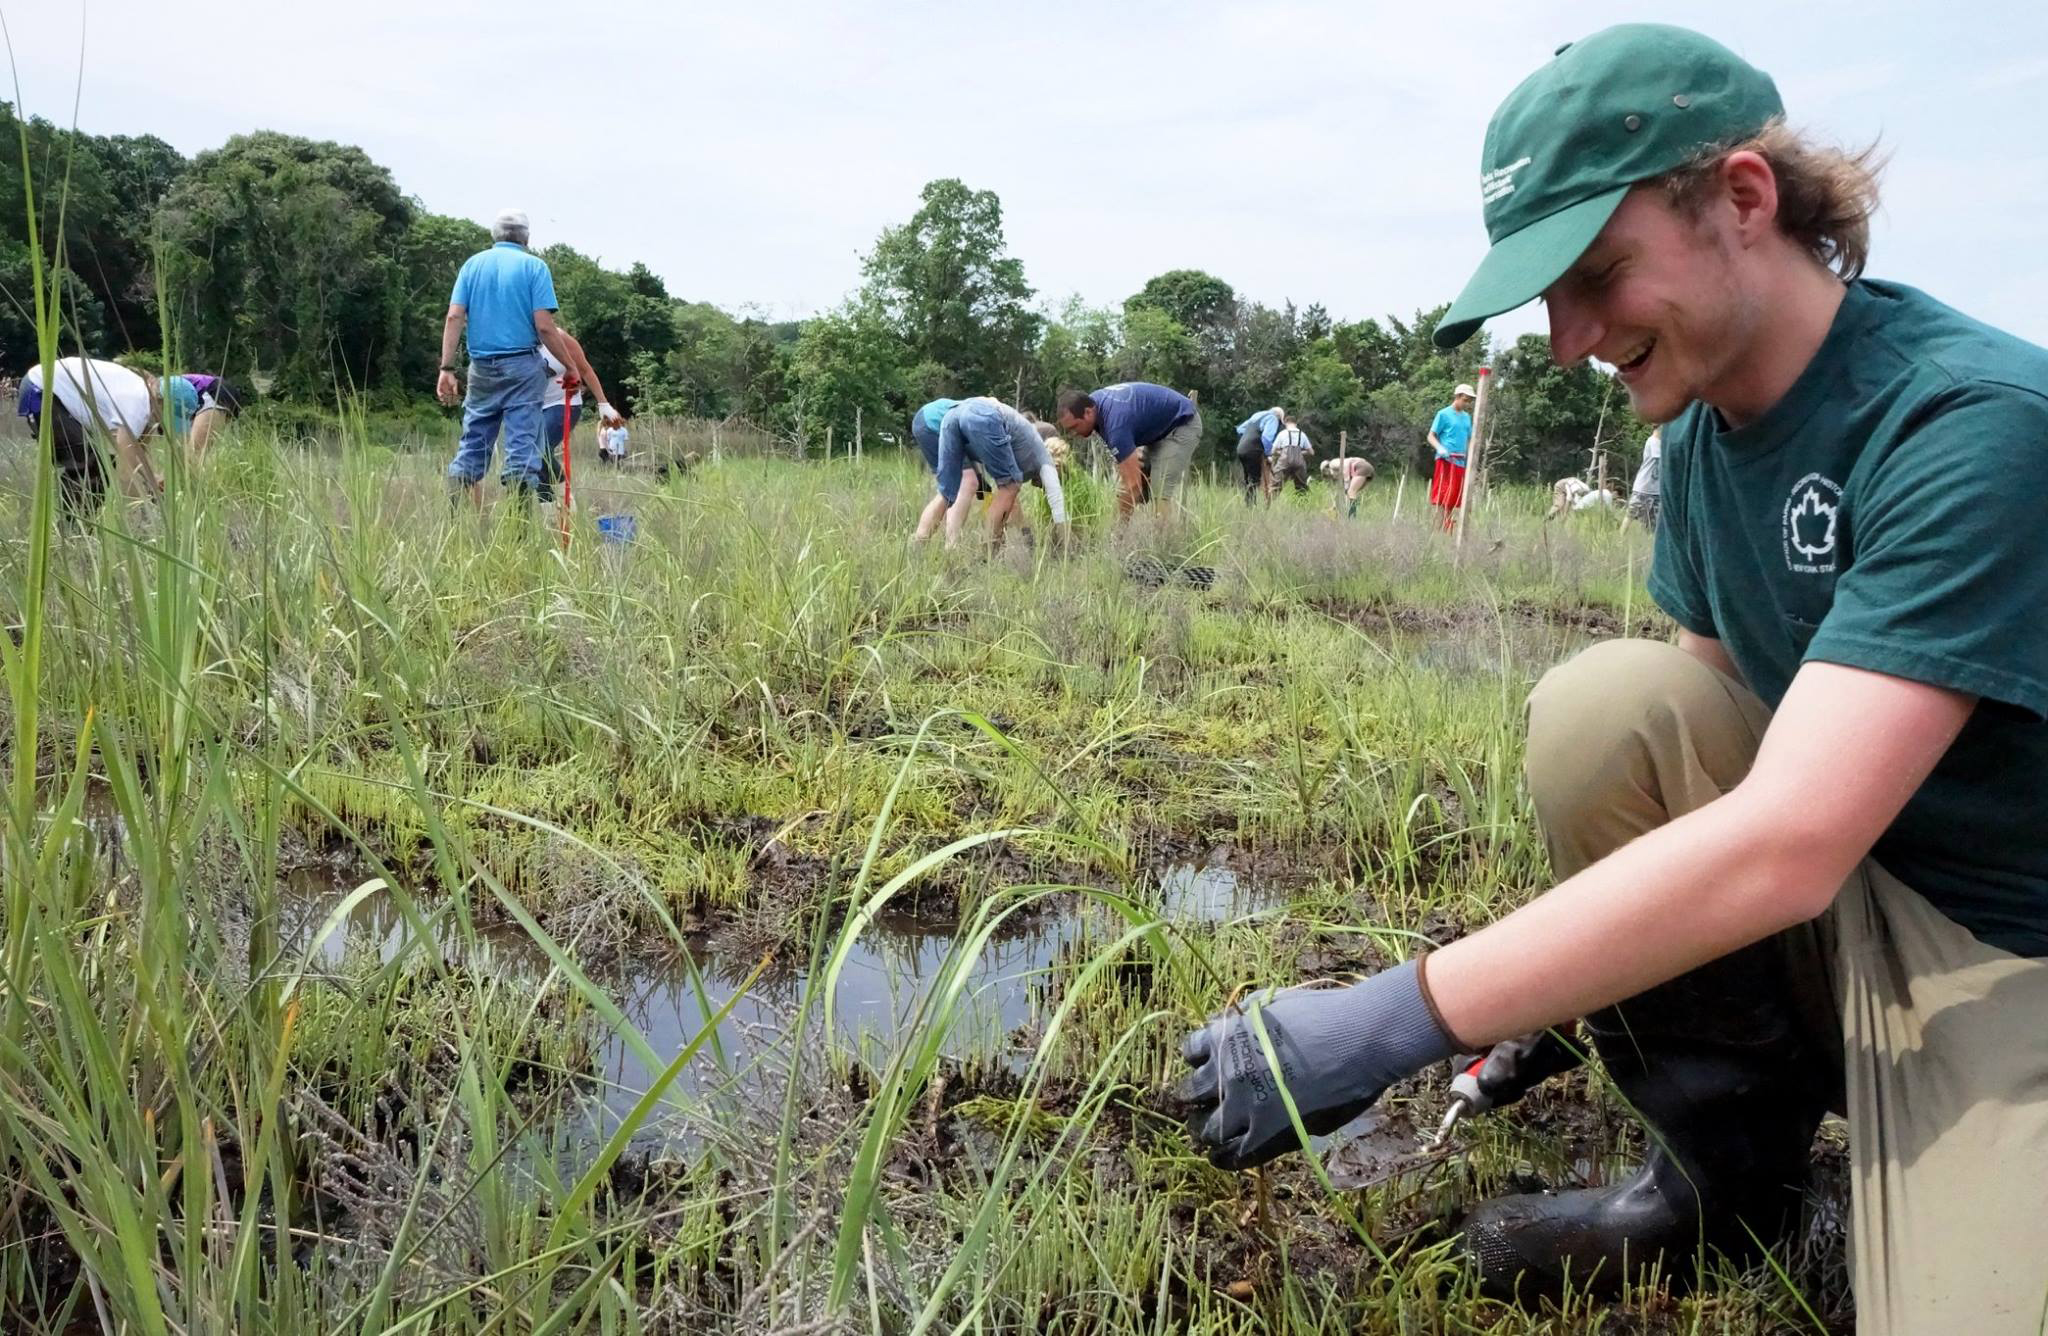 Volunteers join a New York State Parks employee in planting salt marsh grasses at Sunken Meadow State Park.